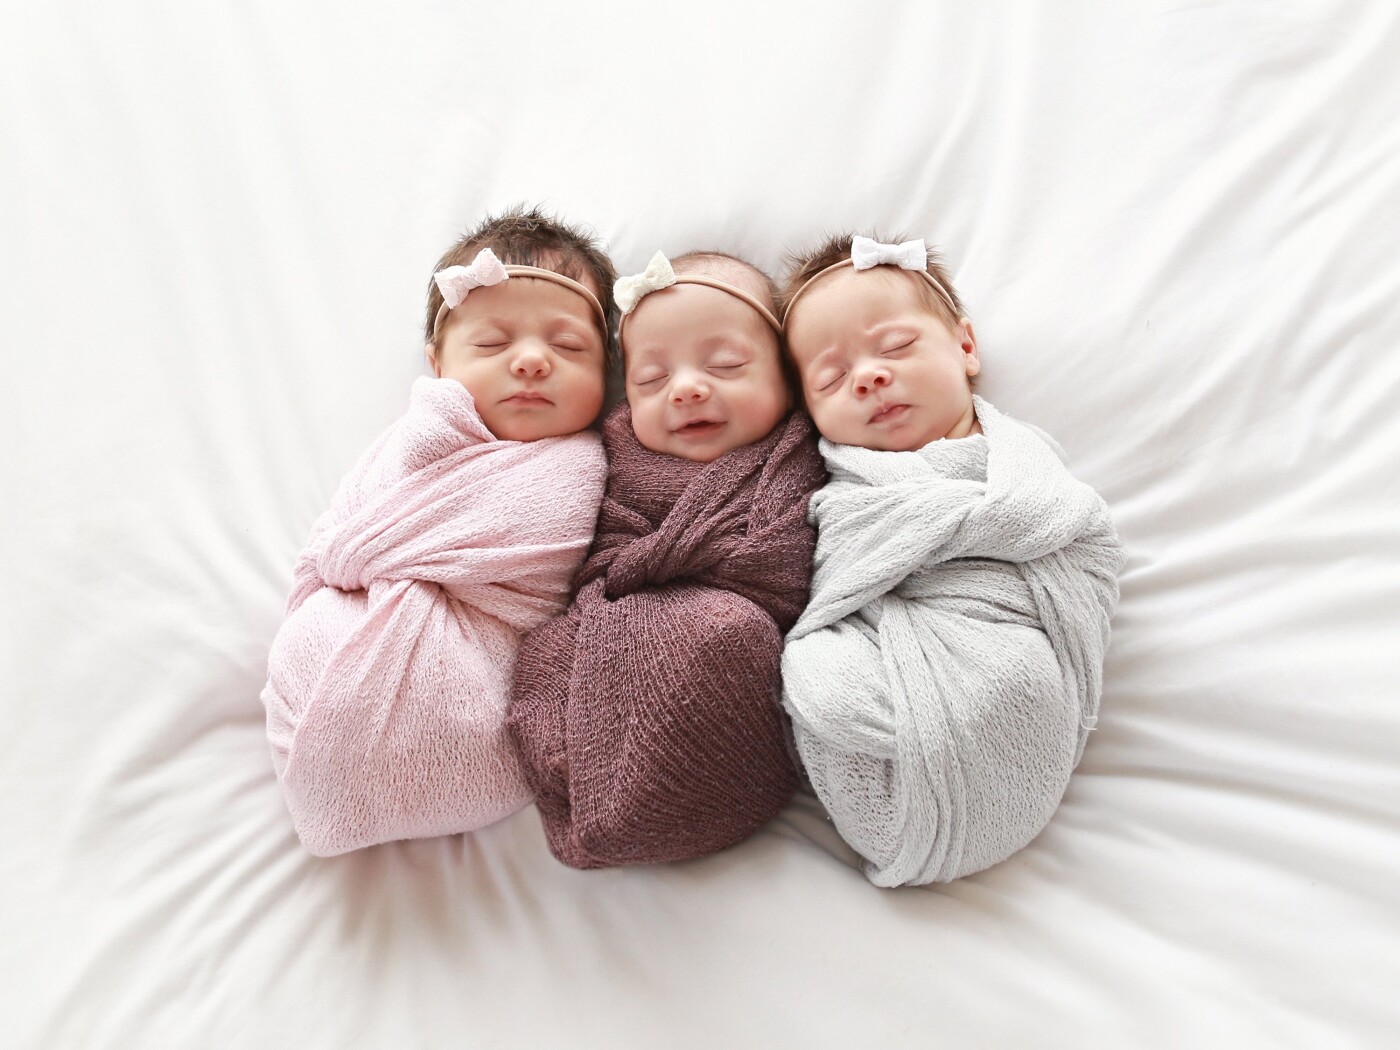 Having Triplets myself I was ecstatic when I booked a newborn session with Triplet Girls. These sweet girls did great at their session. I'm so happy we got this image. It will be a treasure for their family forever. 